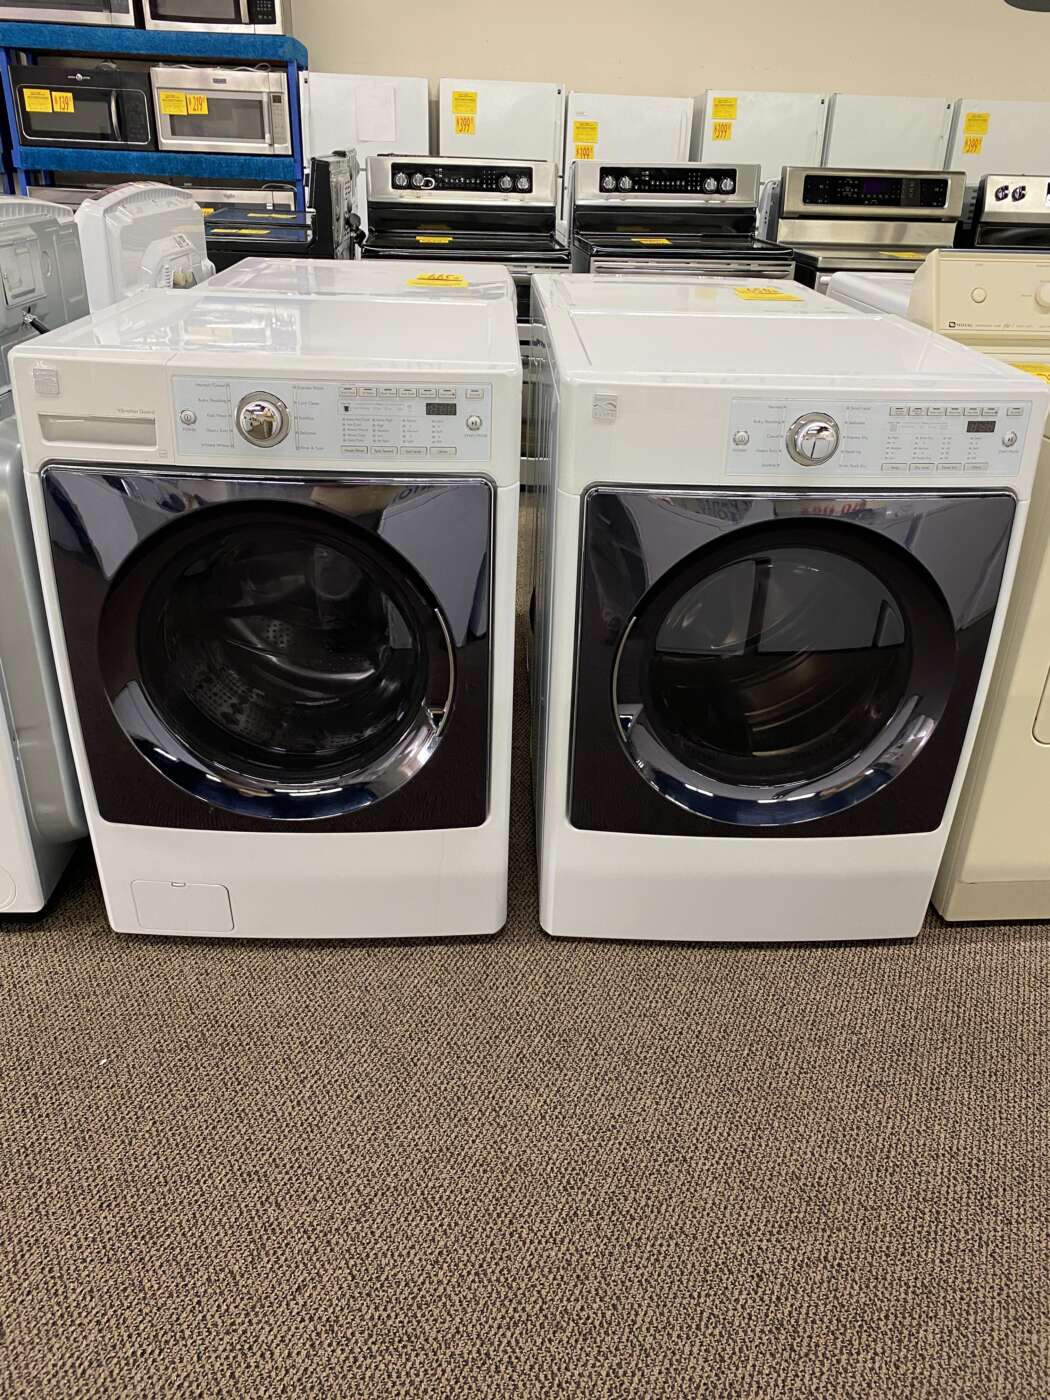 Reconditioned KENMORE 4.0 Cu. Ft. Front-Load H/E Washer & 7.3 Cu. Ft. Electric Dryer – White